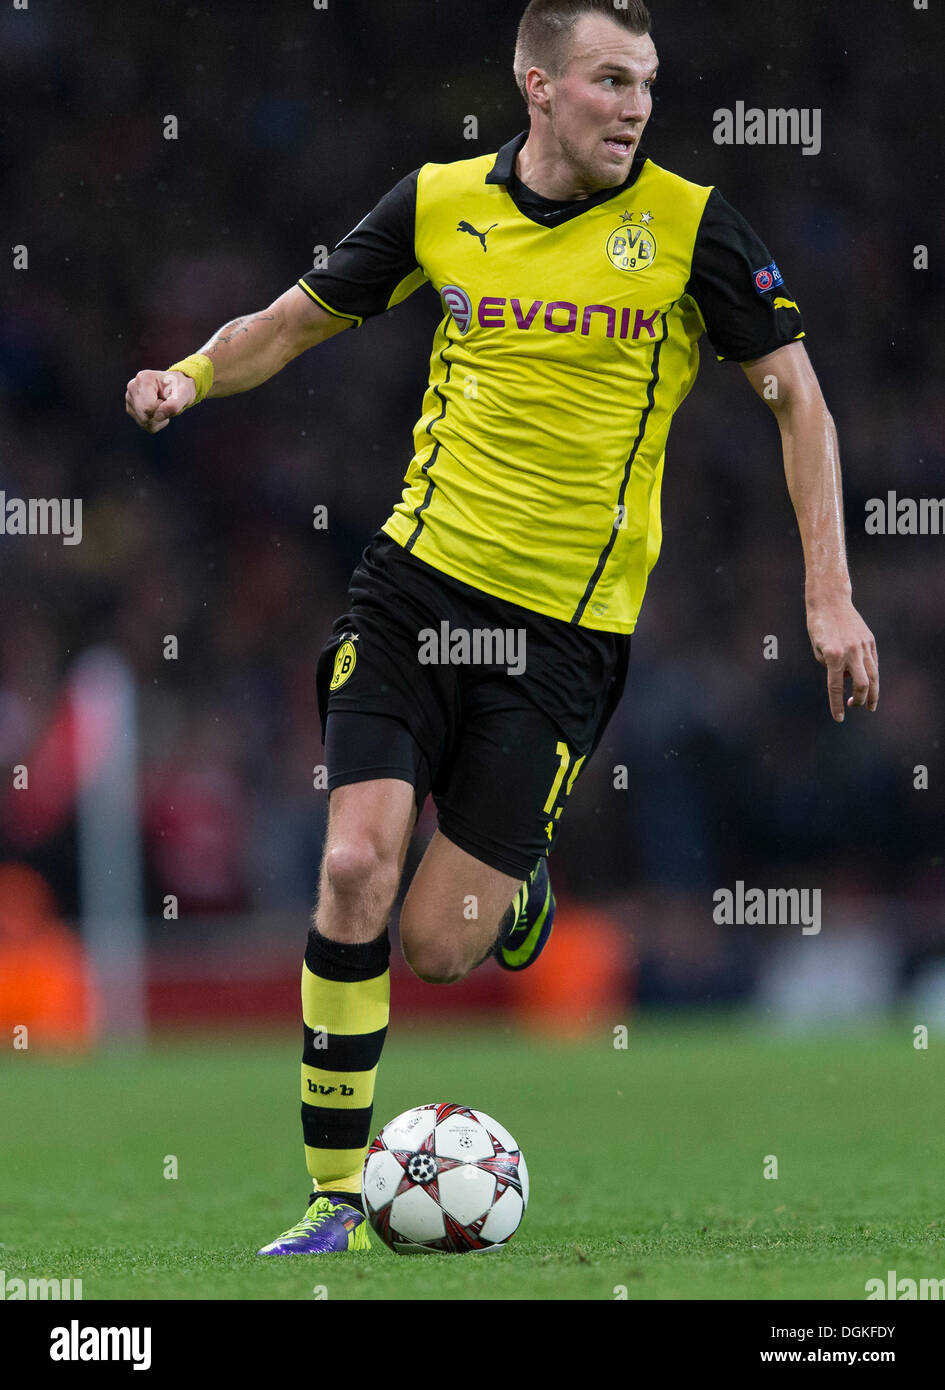 London, UK. 22nd Oct, 2013. Borussia Dortmund midfielder Kevin GROSSKREUTZ puts in a cross for the winning goal during the Champions League game between Arsenal and Borussia Dortmund from the Emirates Stadium. © Action Plus Sports/Alamy Live News Stock Photo